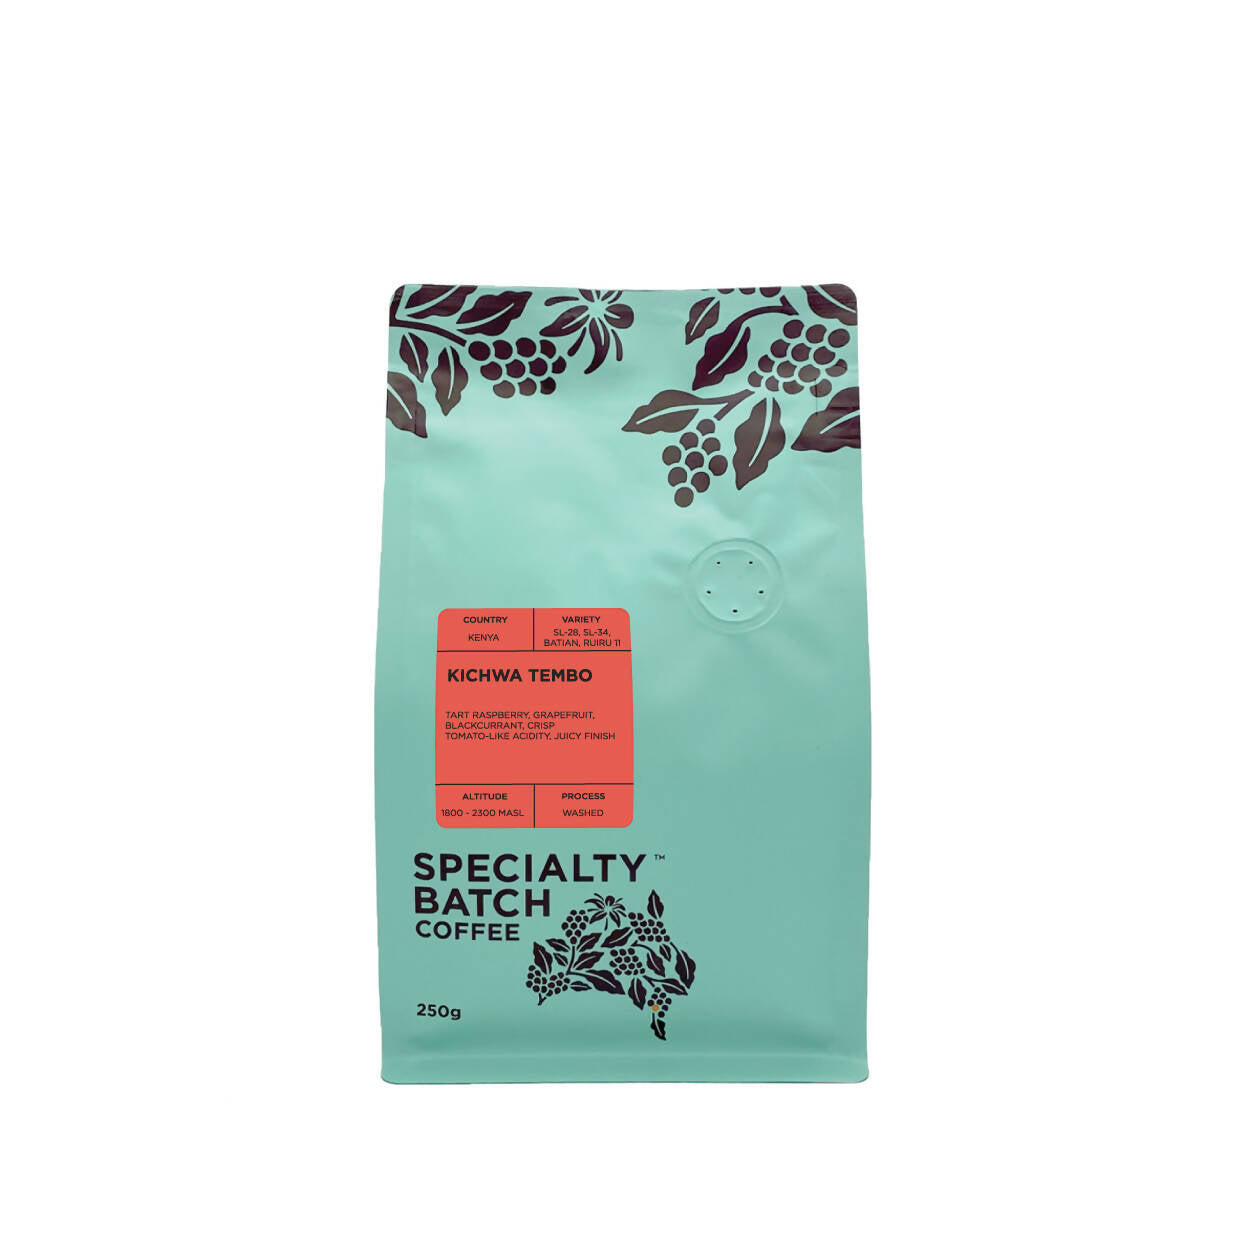 Kenya Kichwa Tembo - Filter - BeanBurds SPECIALTY BATCH COFFEE 250g (10 - 12 cups) / Whole beans